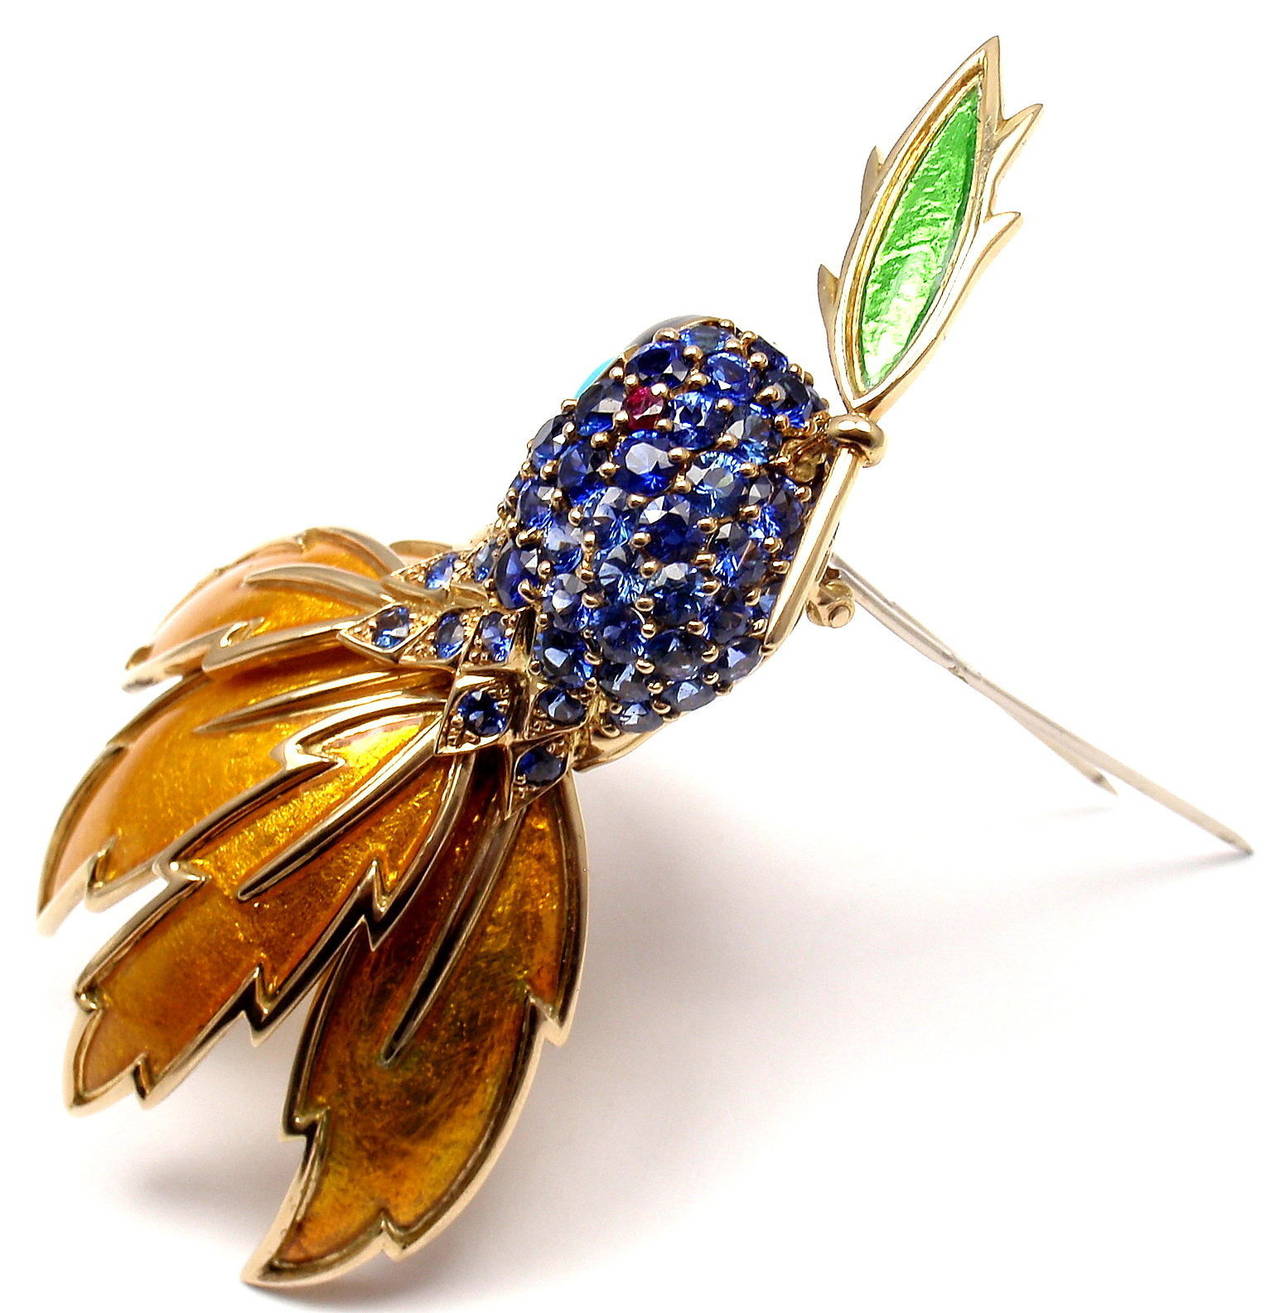 18k Gold Sapphire Ruby Turquoise Enamel Parrot Brooch/Pin by Jean Schlumberger for Tiffany & Co. 
With 75 round sapphires total weight approx. 12ct
1 black onyx
1 round ruby
1 Turquoise

Details: 
Measurements: 3